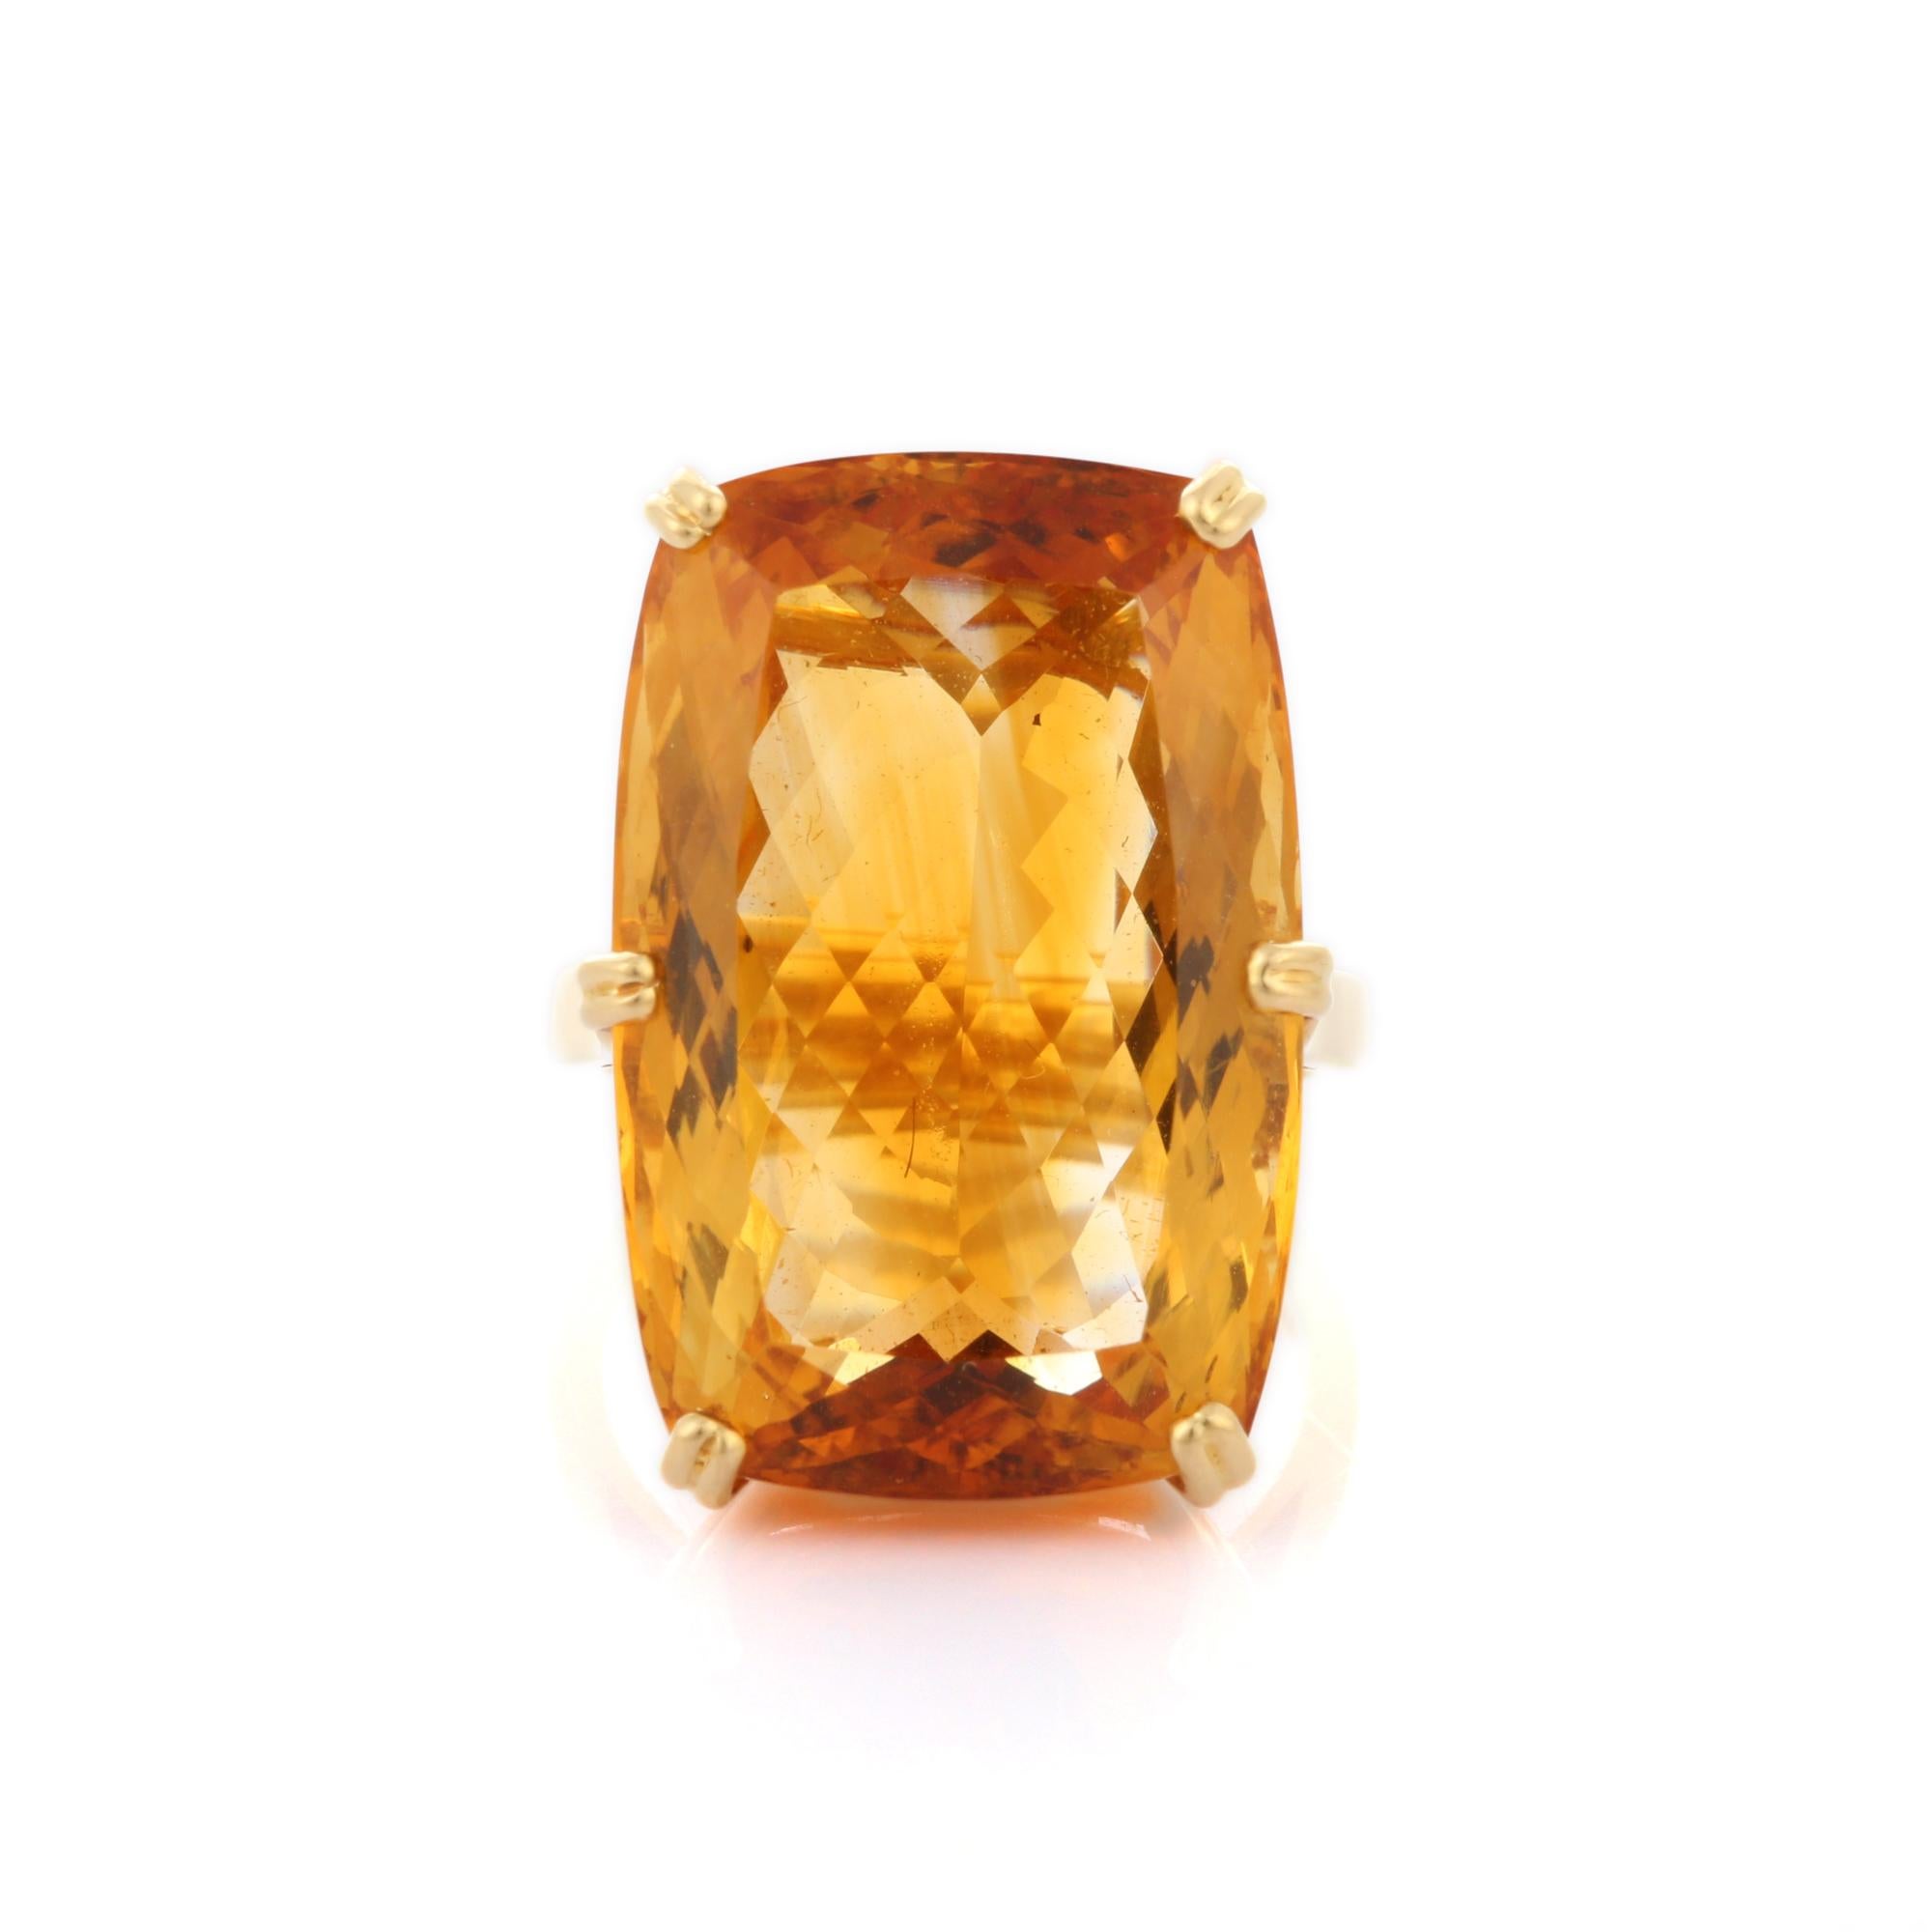 For Sale:  28.8 Ct Cushion Cut Citrine Gemstone Cocktail Ring in 18K Yellow Gold 7